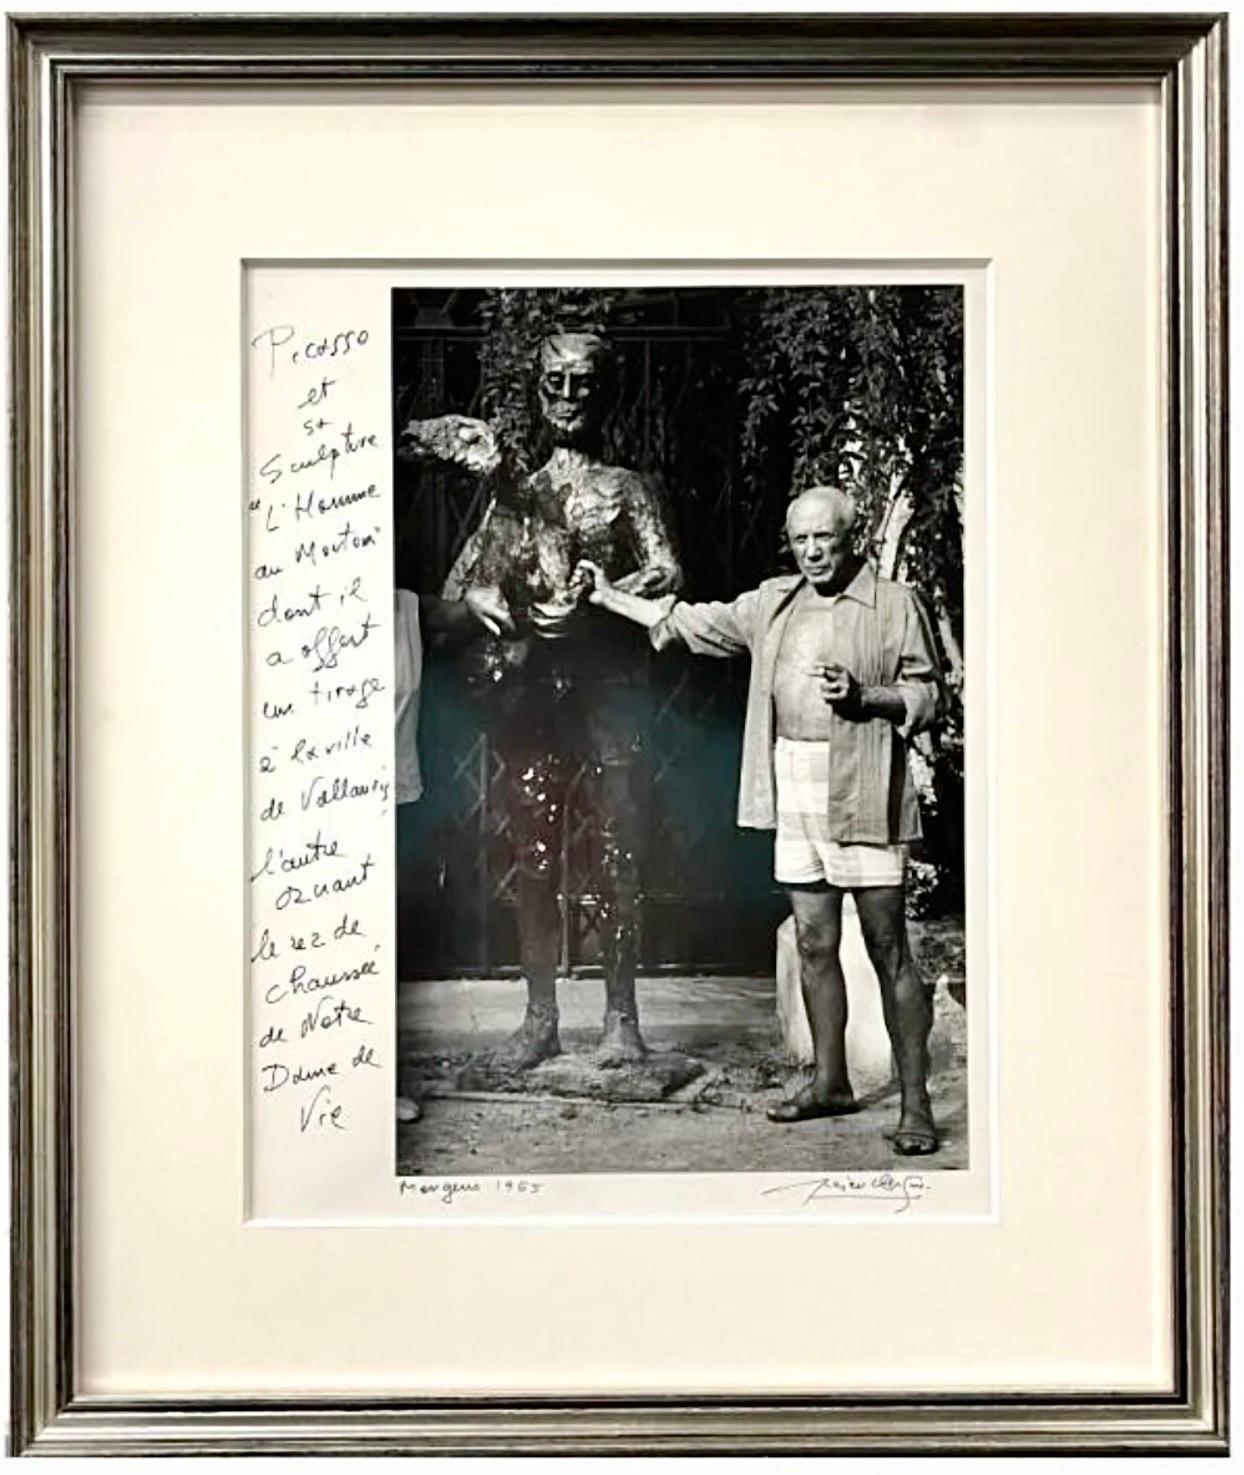 Lucien Clergue (FRENCH, 1934 - 2014) 
Gelatin silver photographic print depicting Pablo Picasso in the garden with a large bronze sculpture. Mougins, 1965.
Hand signed by the artist with hand written description. Titled and dated lower left.